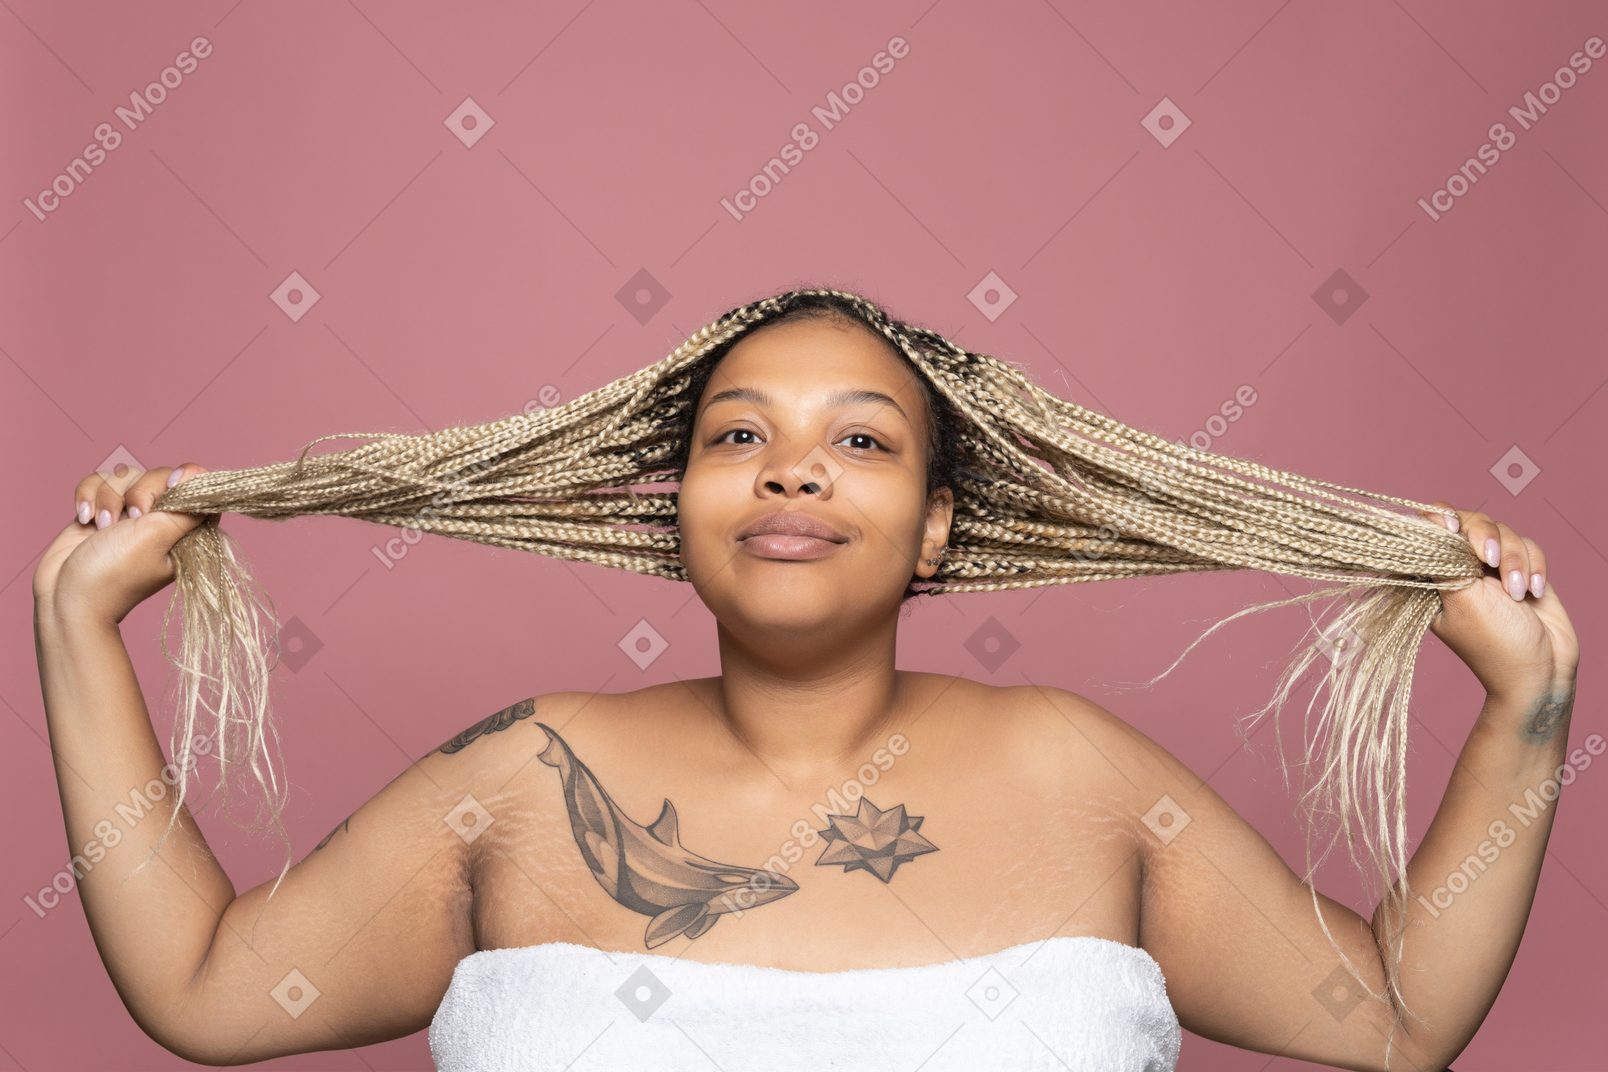 Portrait of a smiling plump woman with long blond dreads